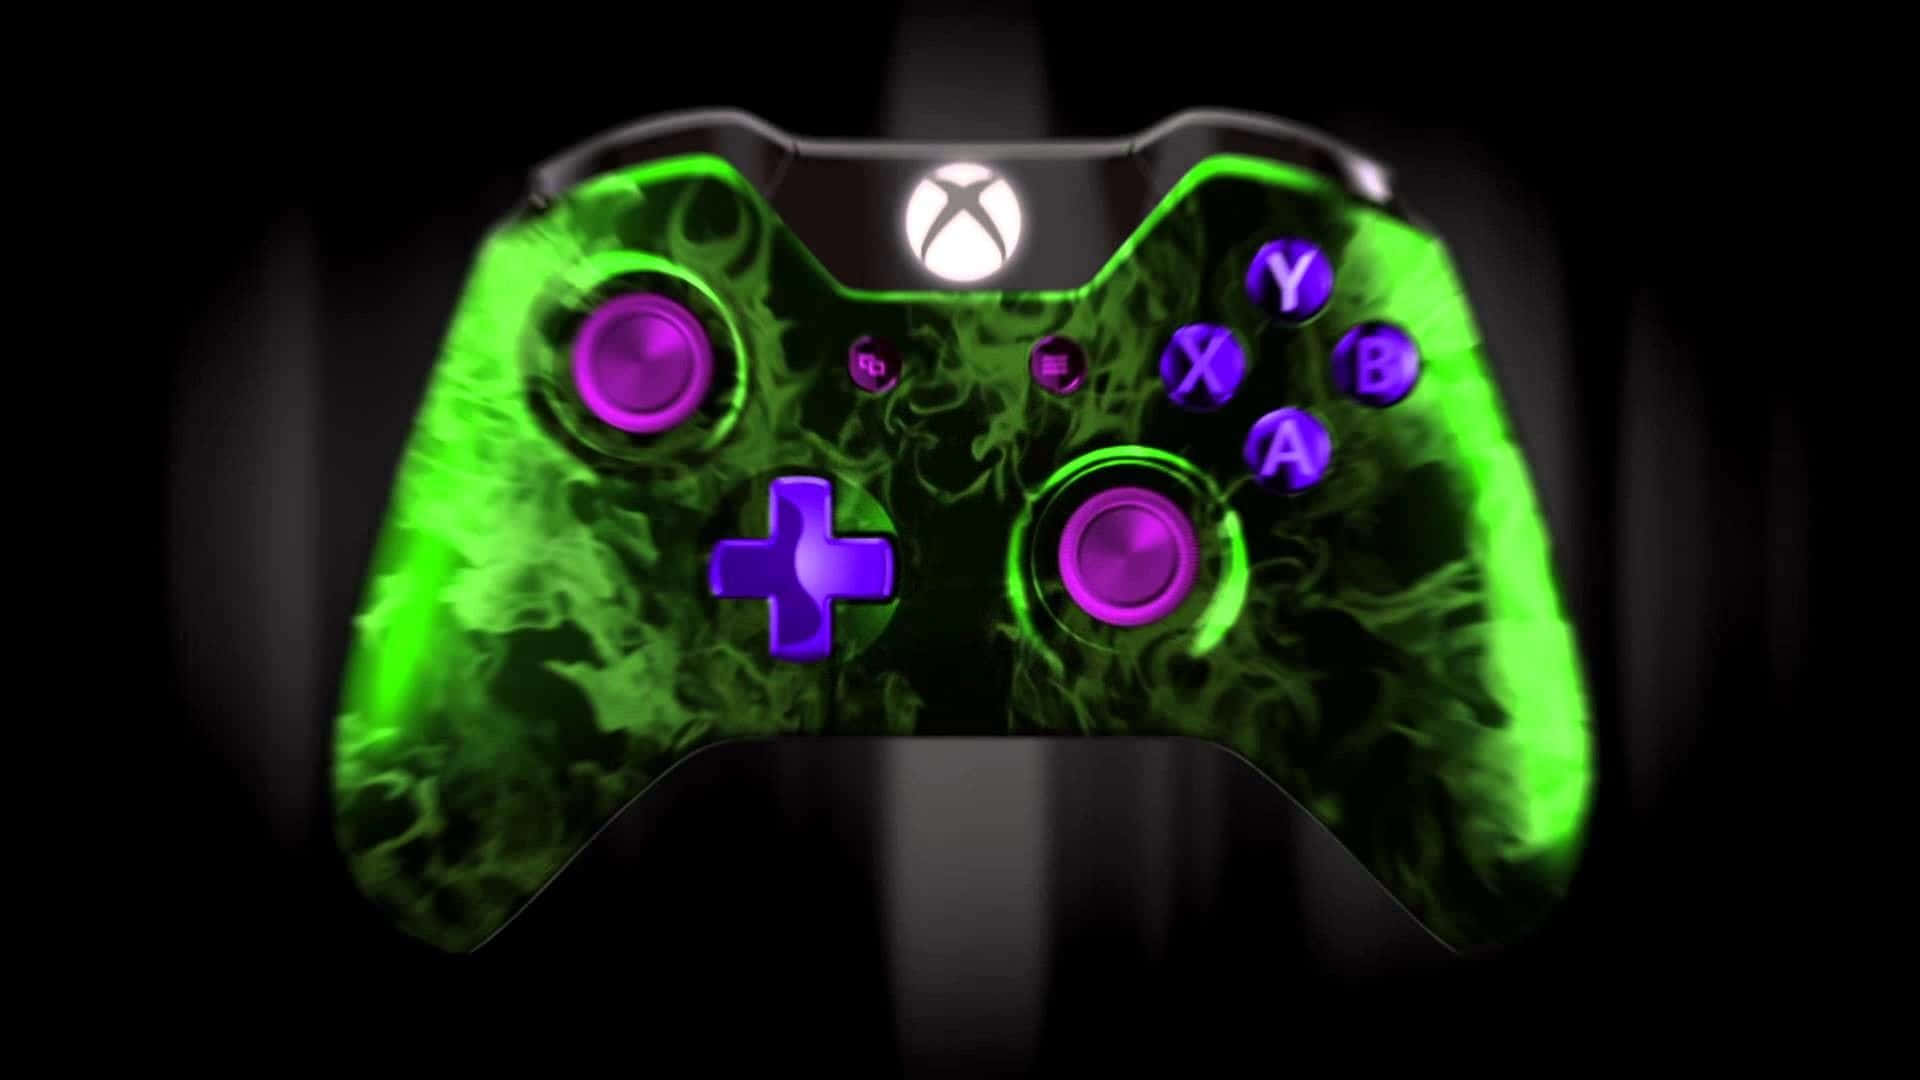 Show Your Gaming Skills With A Cool Xbox